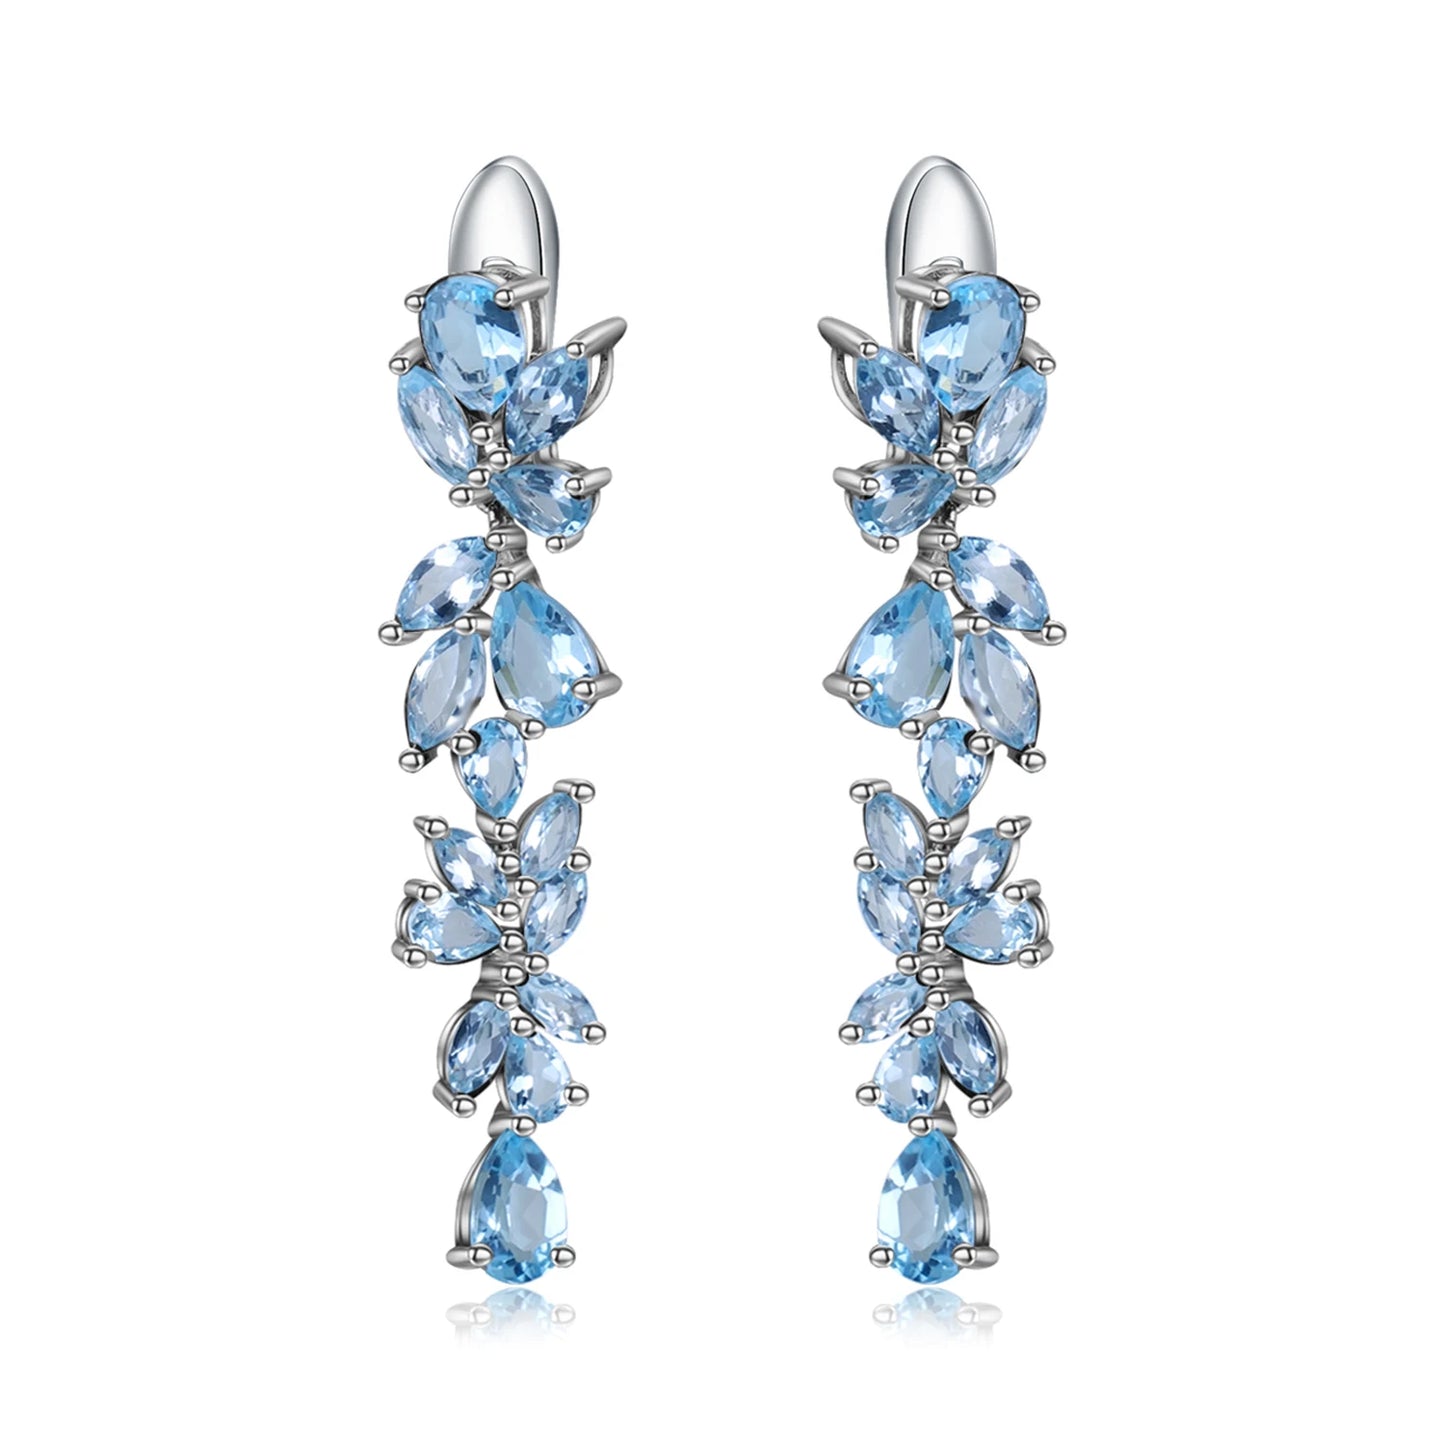 GEM'S BALLET 20.35Ct Natural Red Garnet Earrings 925 Sterling Sliver Leaves Branches Drop Earrings For Women Engagement Jewelry Sky Blue Topaz 925 Sterling Sliver CHINA